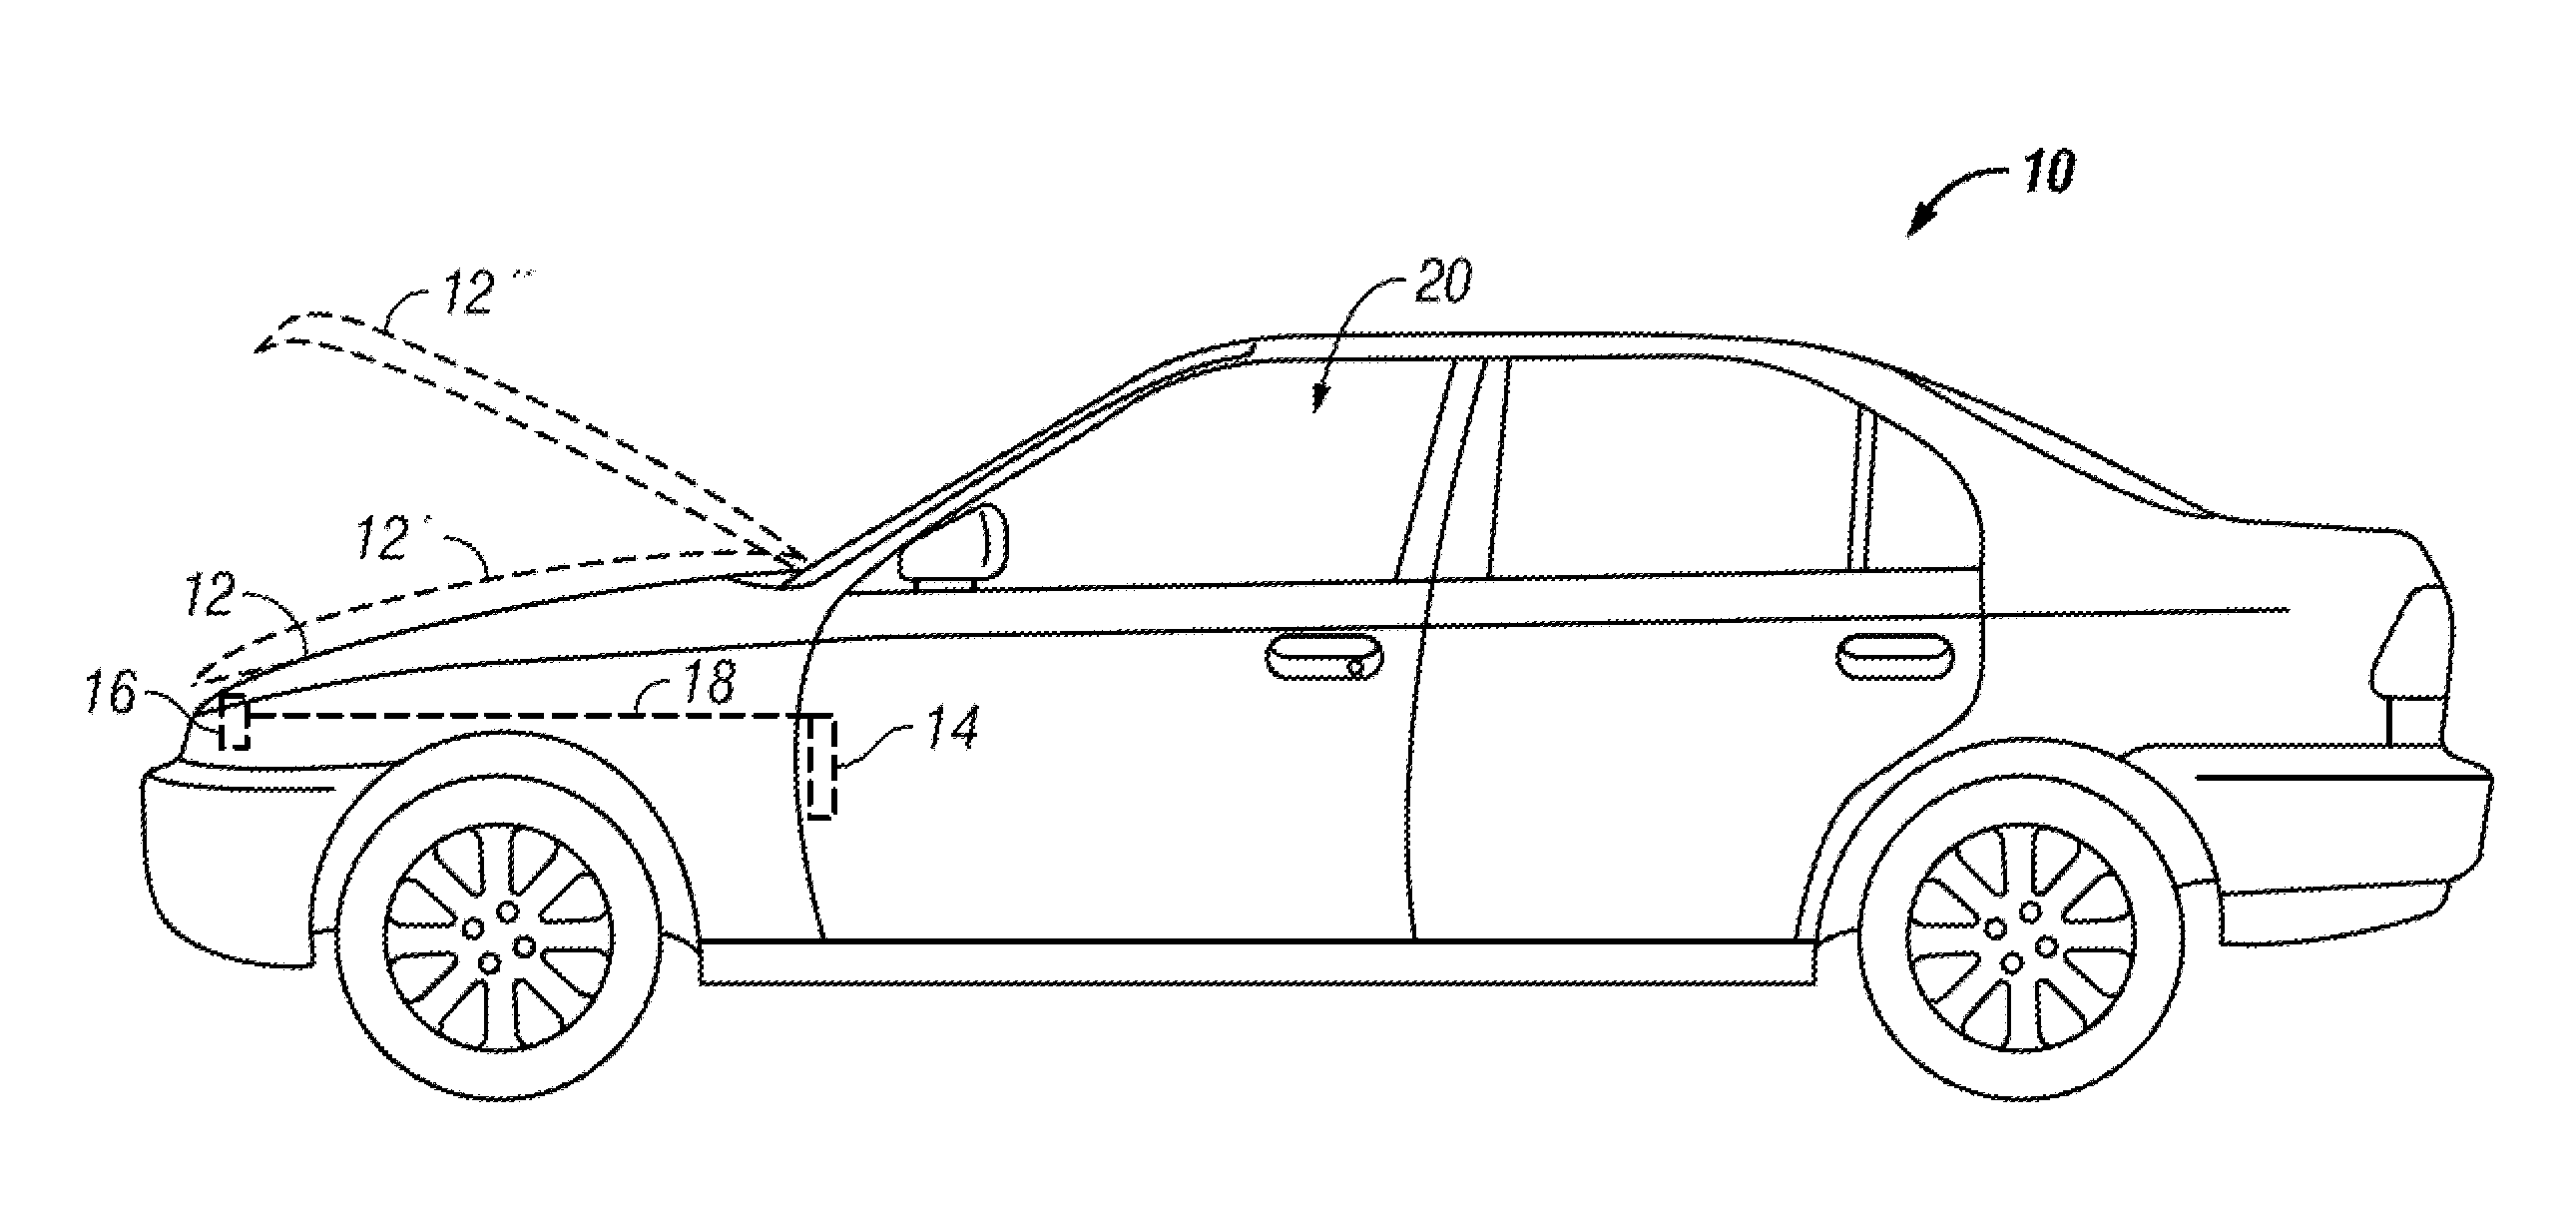 Dual action hood latch assembly for a vehicle